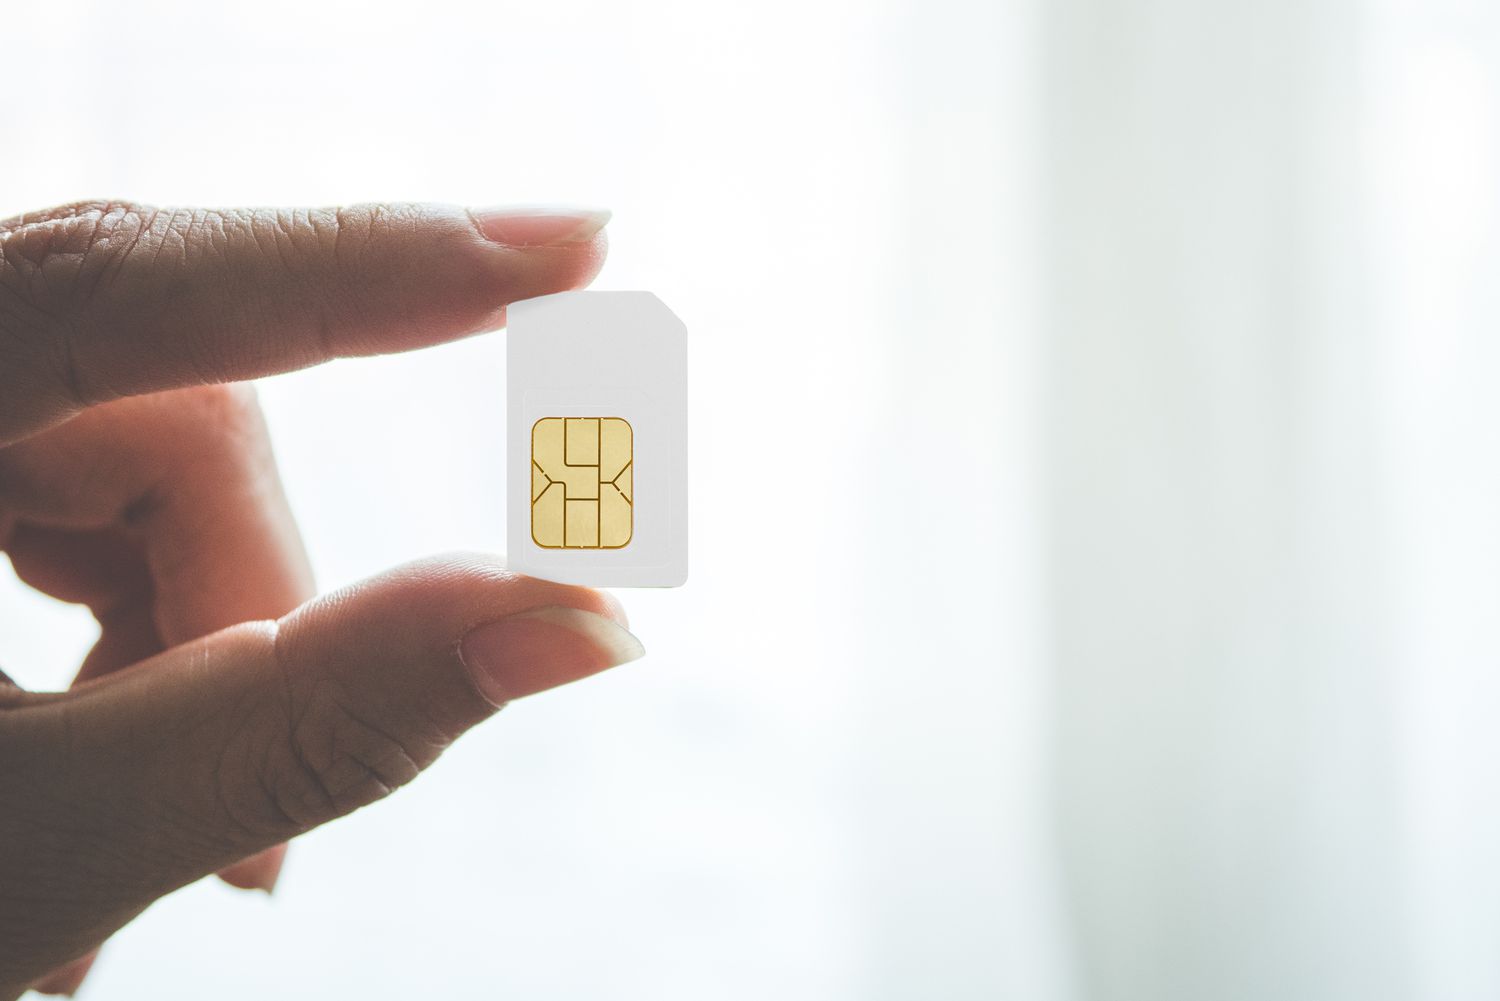 addressing-issues-when-sim-card-doesnt-work-in-another-phone-a-comprehensive-guide